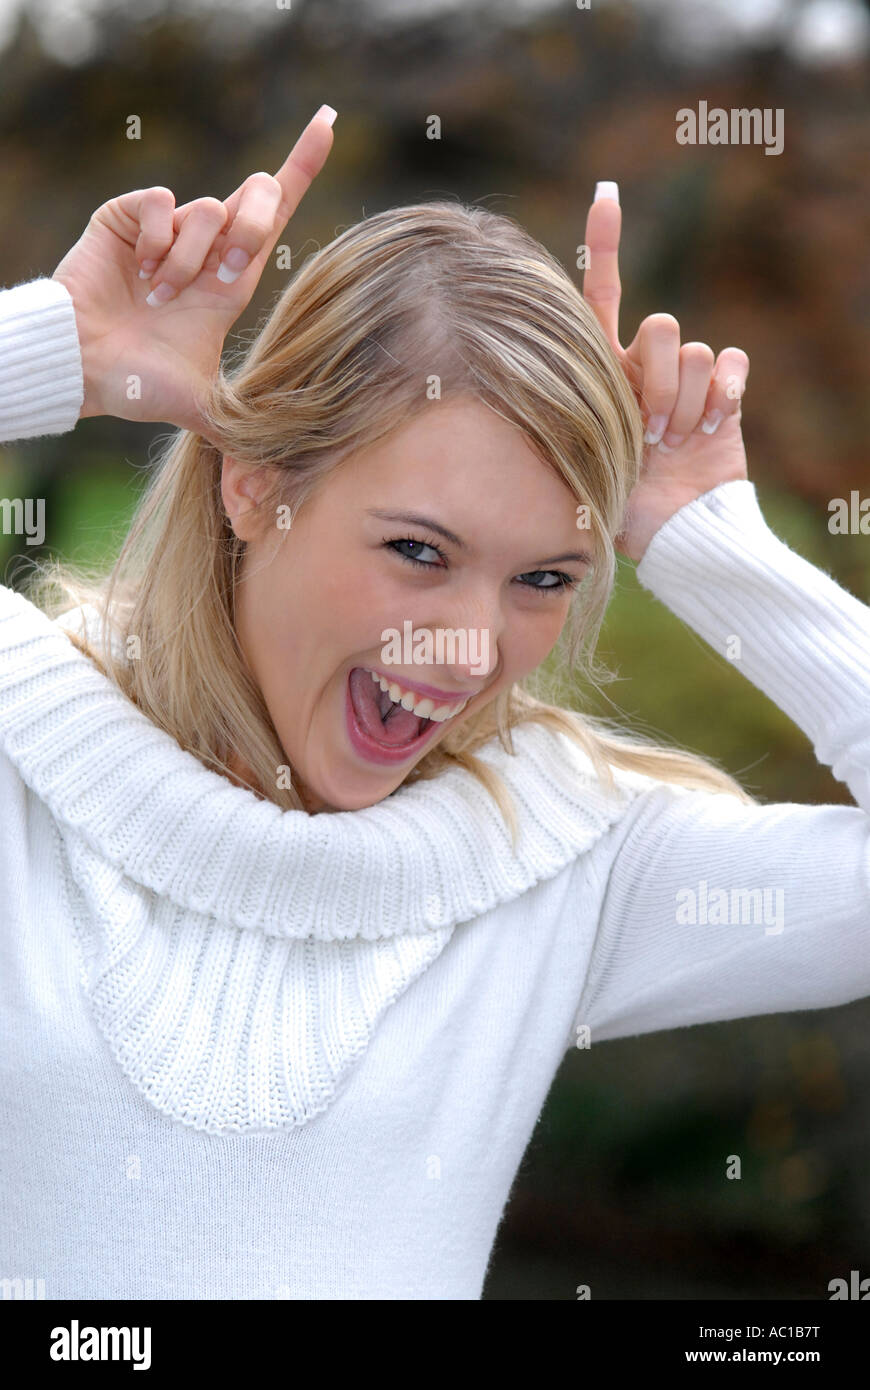 Woman making horns with fingers mouth open portrait Stock Photo